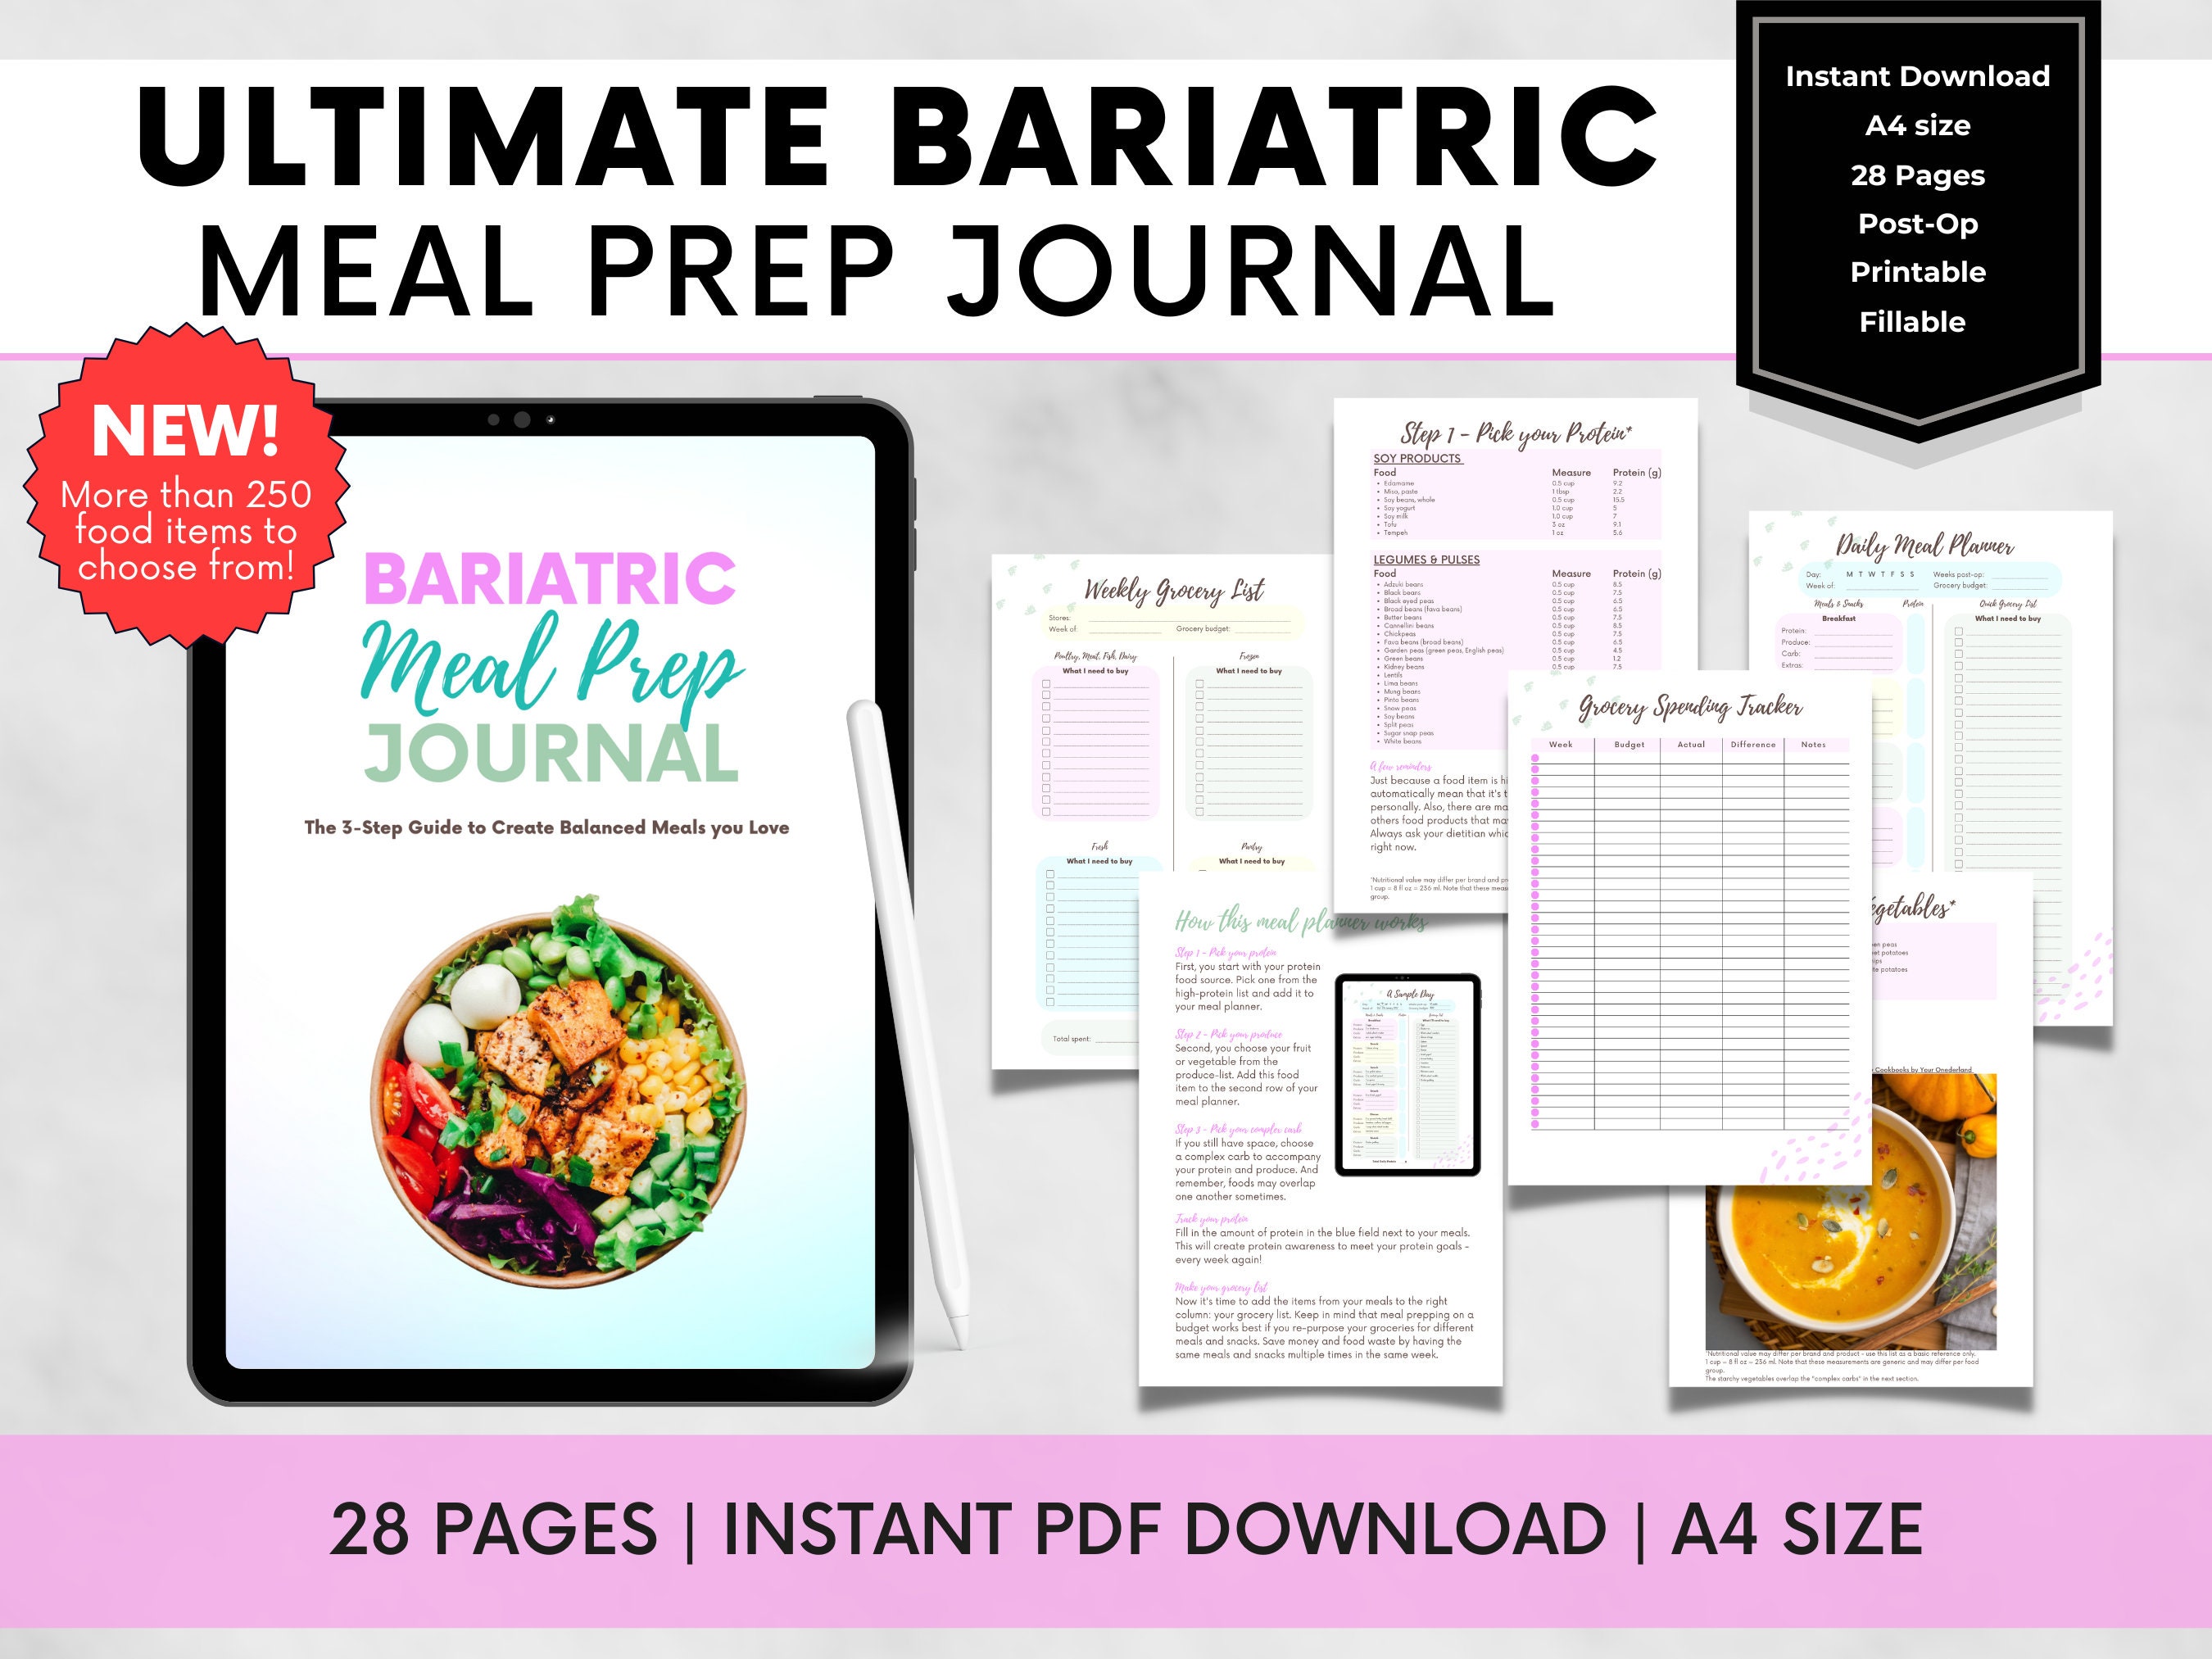 How to Low Carb Meal Prep After Bariatric Surgery (with visuals) - Bariatric  Meal Prep